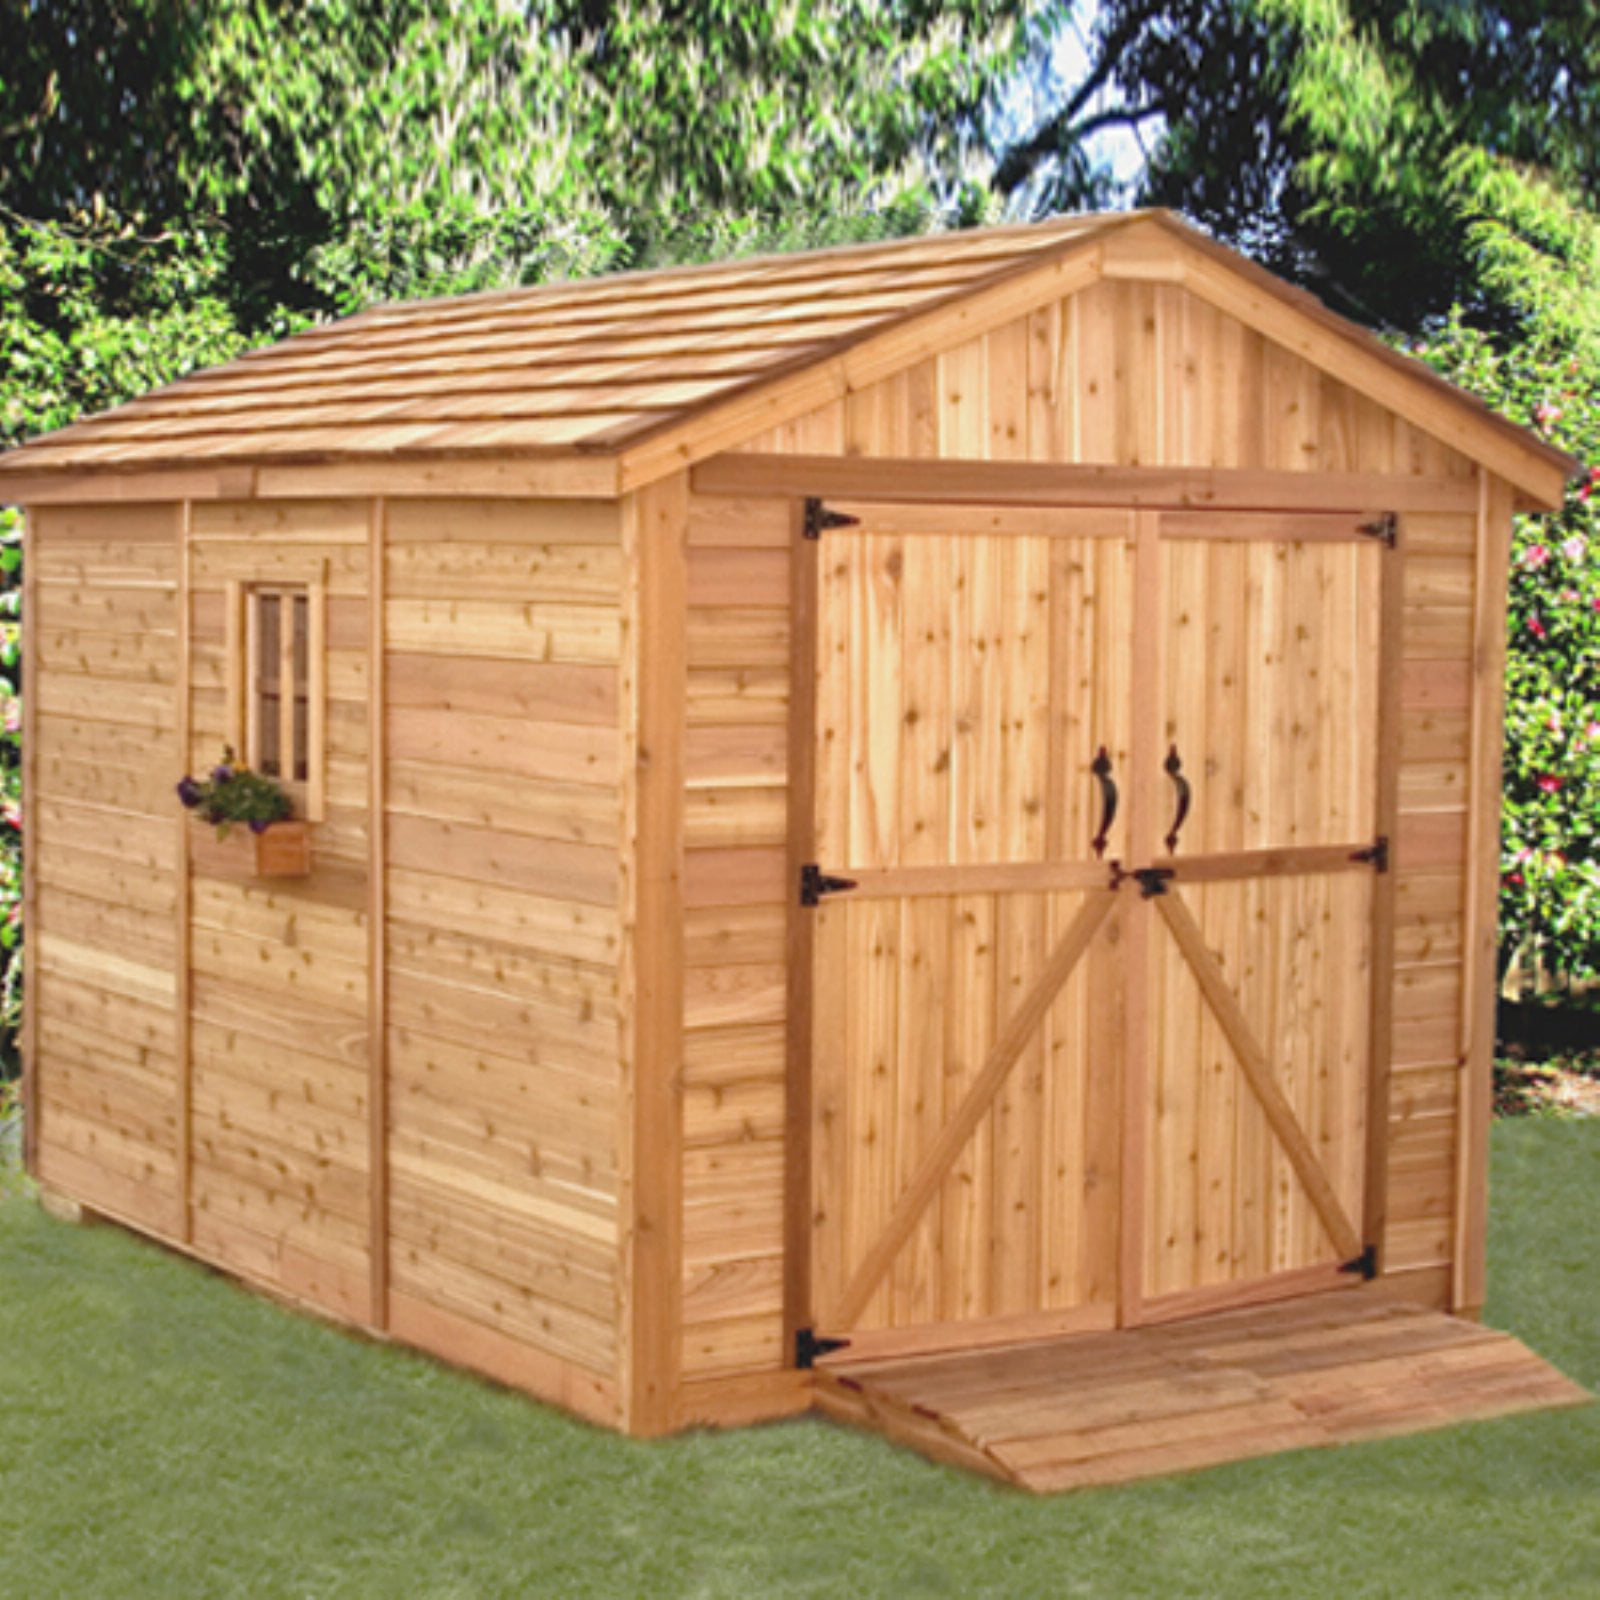 Outdoor Living Today SM812 SpaceMaker 8 x 12 ft. Storage Shed - Walmart.com